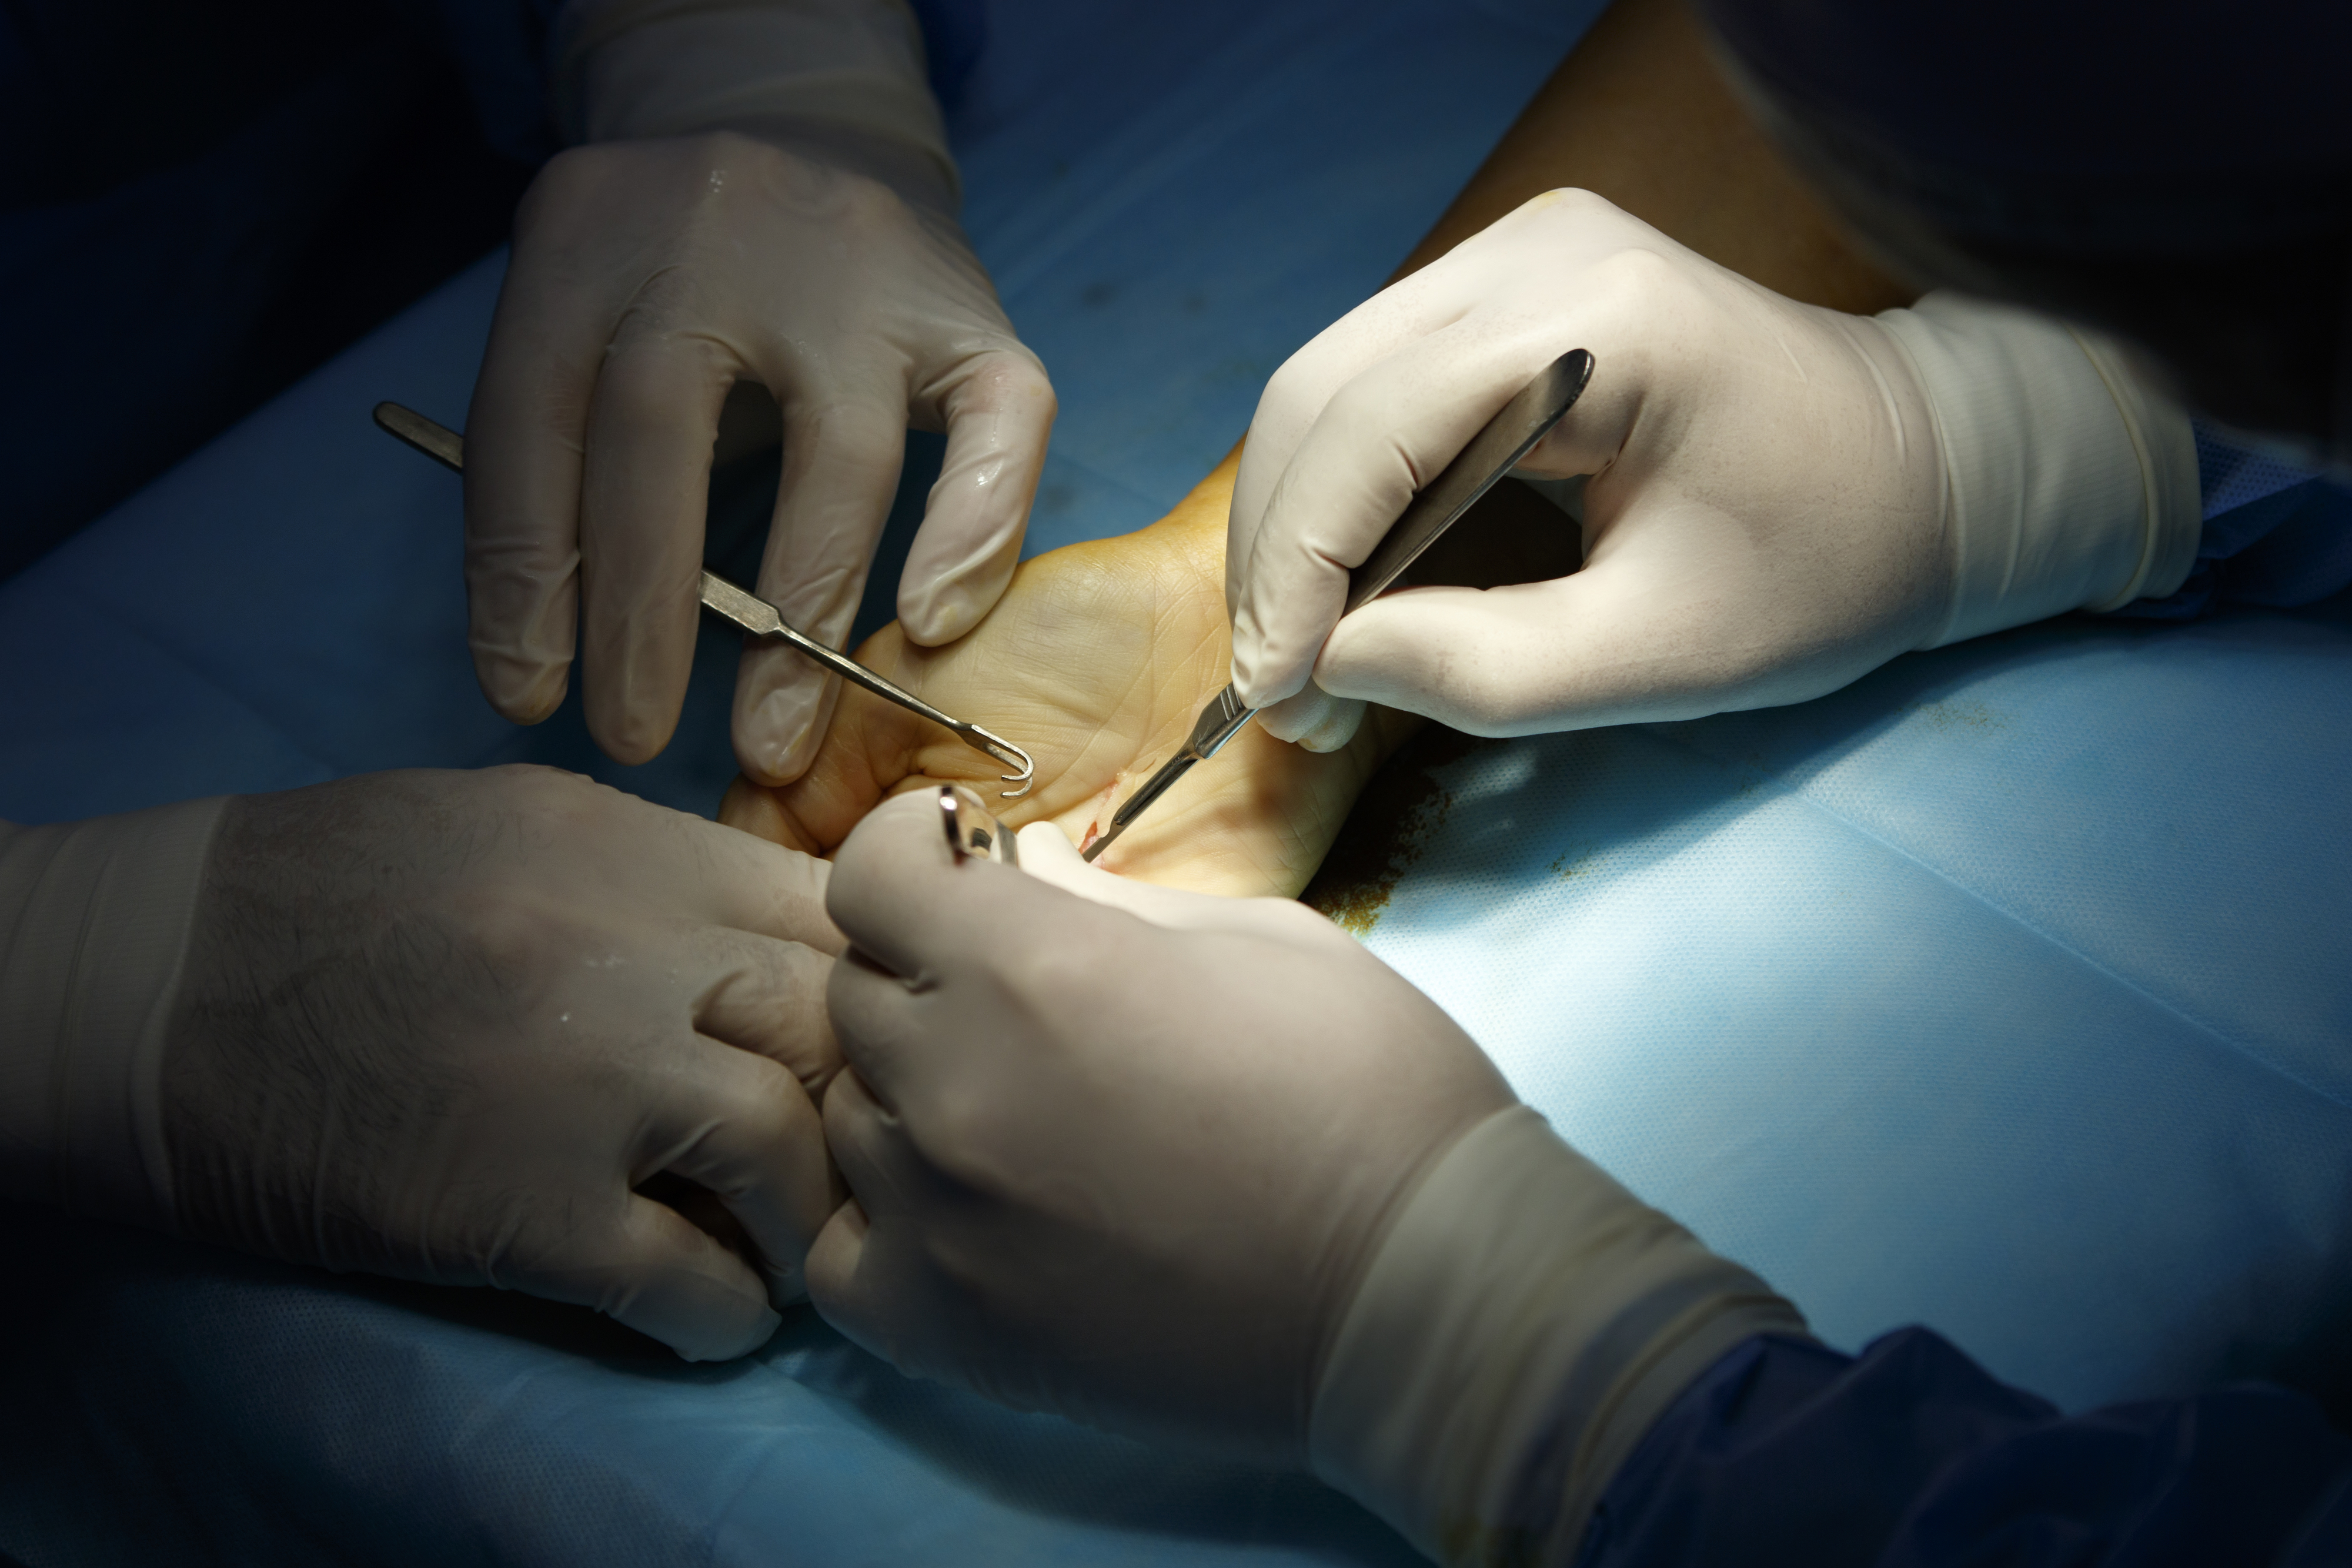 Close-up of surgeons&#x27; gloved hands performing surgery on a patient&#x27;s foot. Surgical instruments and a blue drape are visible